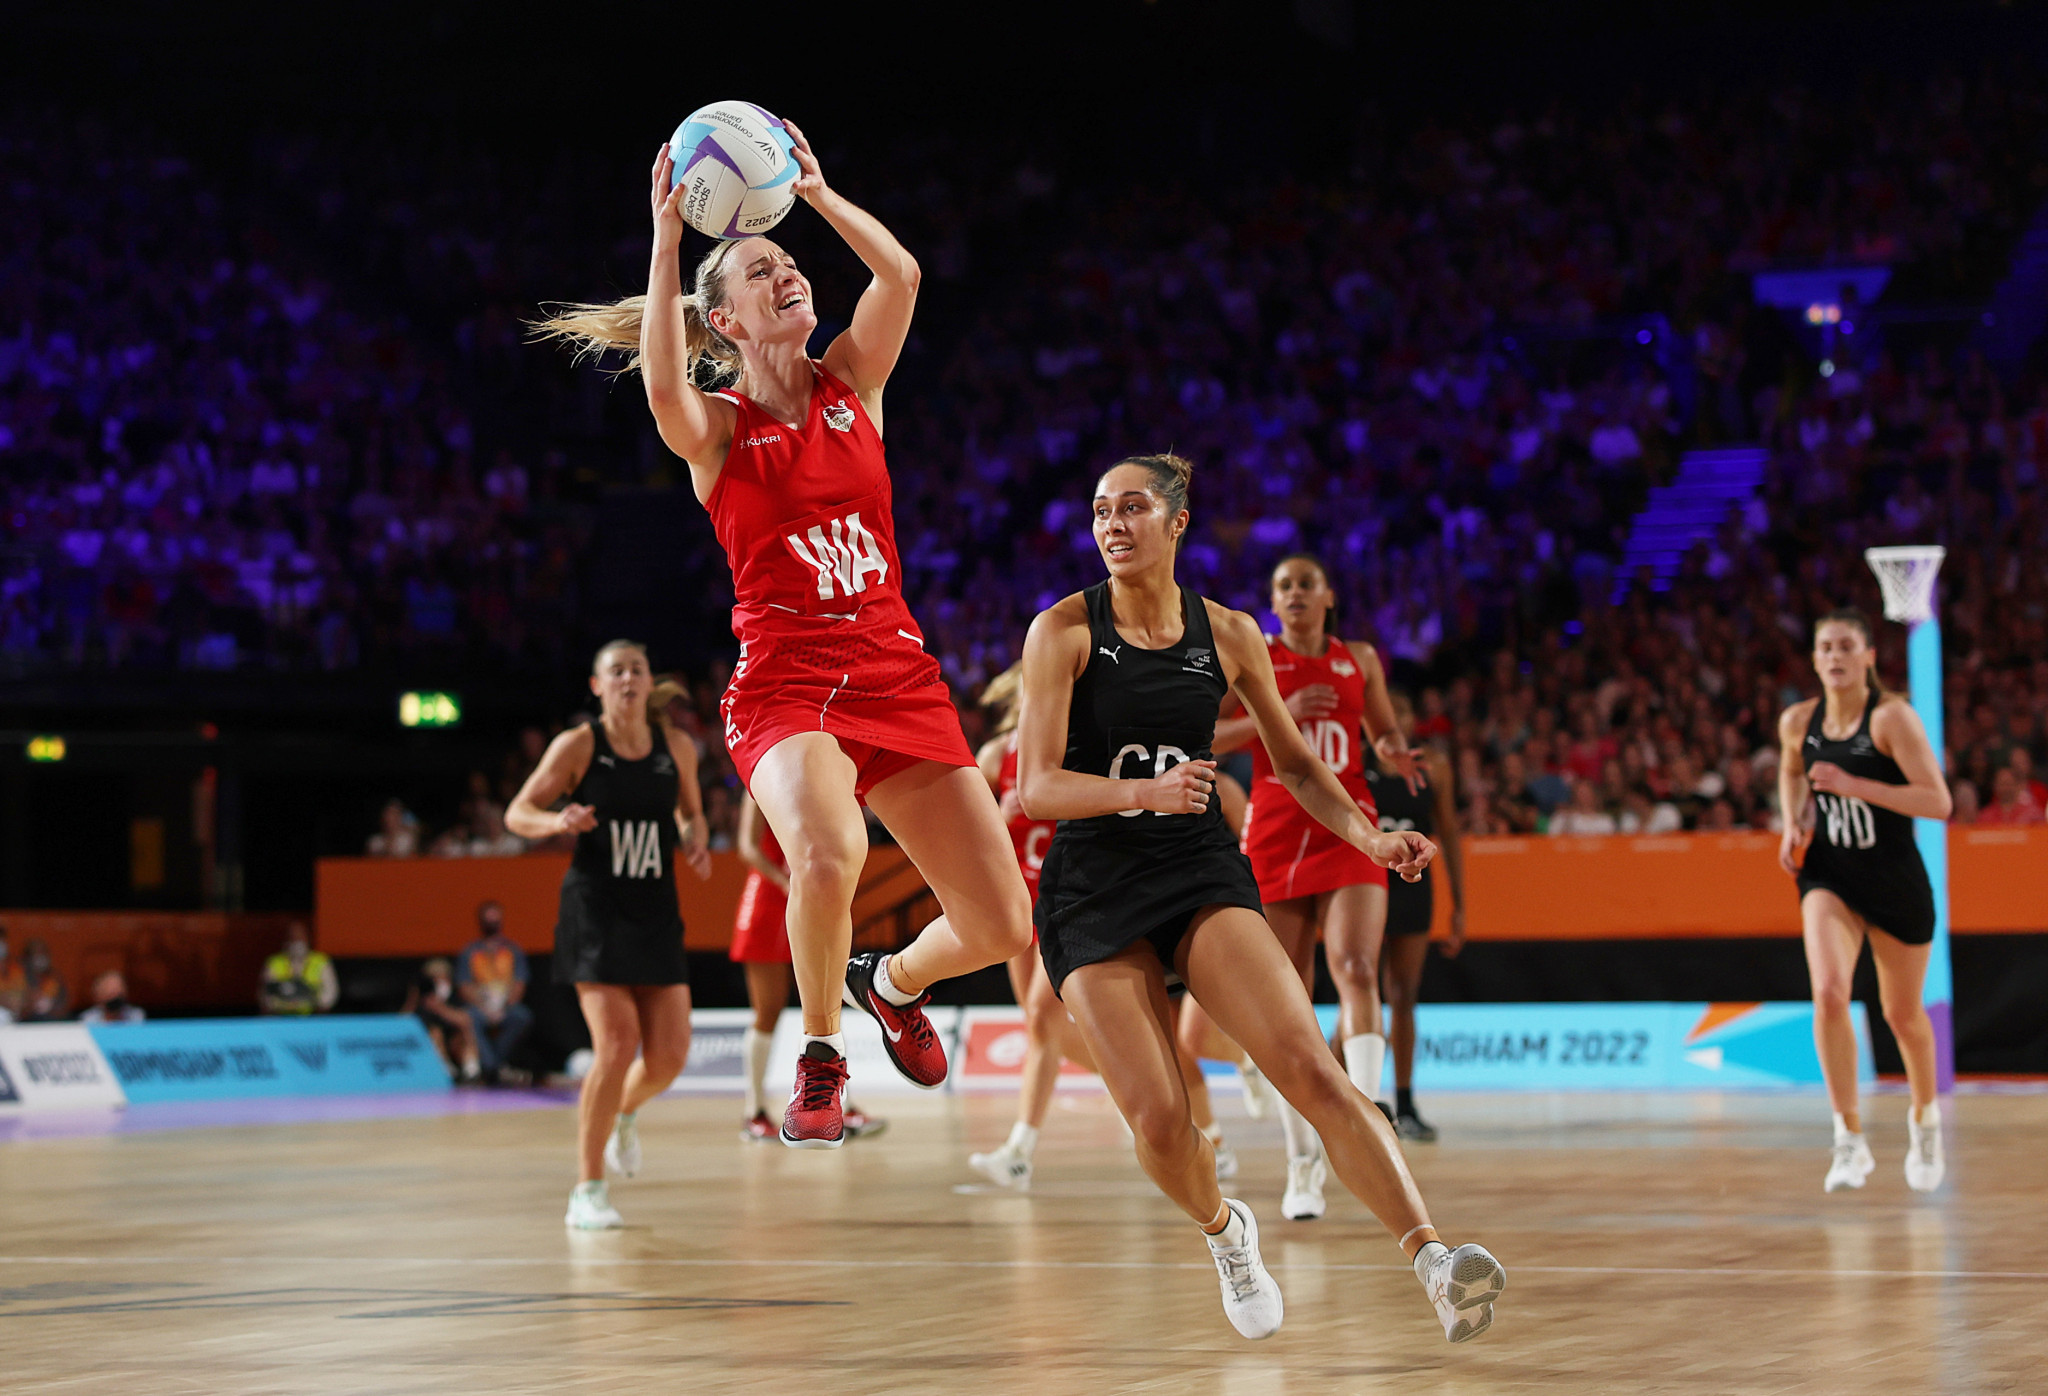 England are one of the leading netball teams in the world ©Getty Images